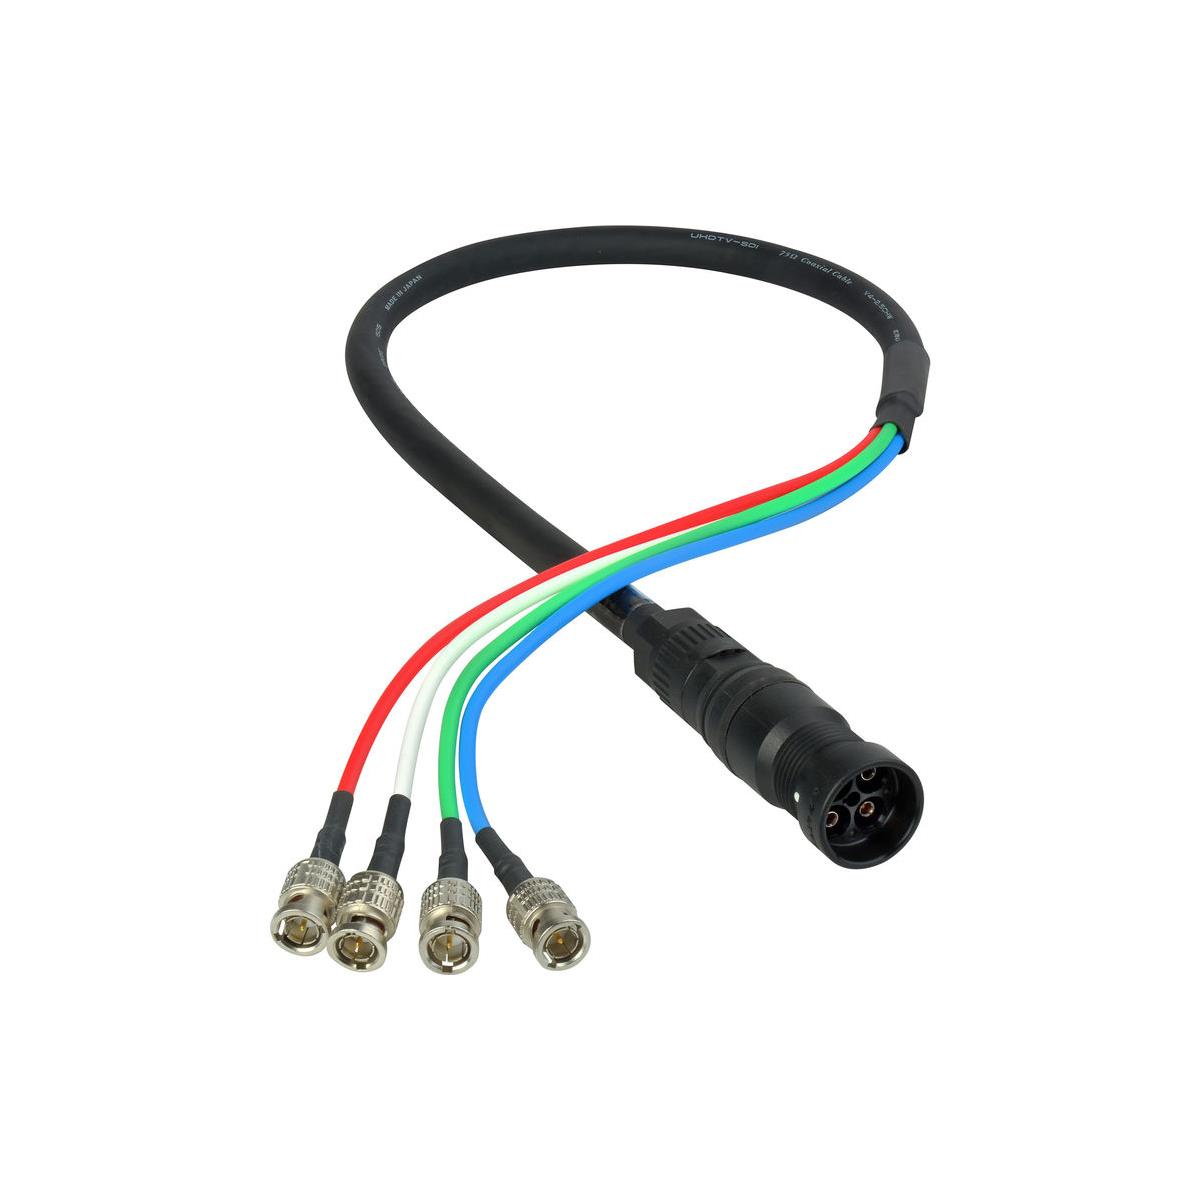 Laird 75' 4K UHD 3G HD-SDI 4-Channel DIN Female to BNC Camera Breakout Cable <b> 4-3G HD-SDI Signal Channel Quick Connect System for 4K/UHD Video Formats </b>One step, quick-connect Laird coax Canare cable assemblies connect 4 channels of 3G HD-SDI signals for 4K/UHD video formats. The Laird cables are assembled with Canare 4 channel, V4-2.5CHW flexible coaxial cable, allowing a break out to 4 Canare BNC or 4 DIN connectors. The Canare male connector, MDM-V4C25HW is designed to mate with the MDF-V4JRU panel mount receptacle which features a 4 DIN pass-through on the back side to increase your connectivity but not your rack space. Laird 4K UHD Canare camera cables assemblies make quick work of keeping everything in line and organized. Available in a variety of lengths. Use with the Canare MDF-V4JRU 4K DIN 1.0/2.3 4-channel chassis mount connector.• Quick connect and disconnect• Multiple 3G-SDI signals to 4K/UHD formats• Canare cable with solid and lightweight nylon resin body• Push-pull locking Canare coax connectors with protective rubber boots• High performance Canare BCP-B25HW BNC or 4 DCP-C25HD DIN connectors• Made in the USA in a Canare trained fiber shop• Canare V4-2.5CHW 4-Channel 4K 75Ohms Coaxial Cable• 4 DIN 1.0/2.3 connectors• MDF-V4JRU accepts MDM-V4C25HW and also DIN 1.0/2.3 plugs<b> Applications </b>• High density 3G-SDI• applications• Mobile trucks• Fly packs• Studios• 4K transmission• Consolidate HD-SDI lines